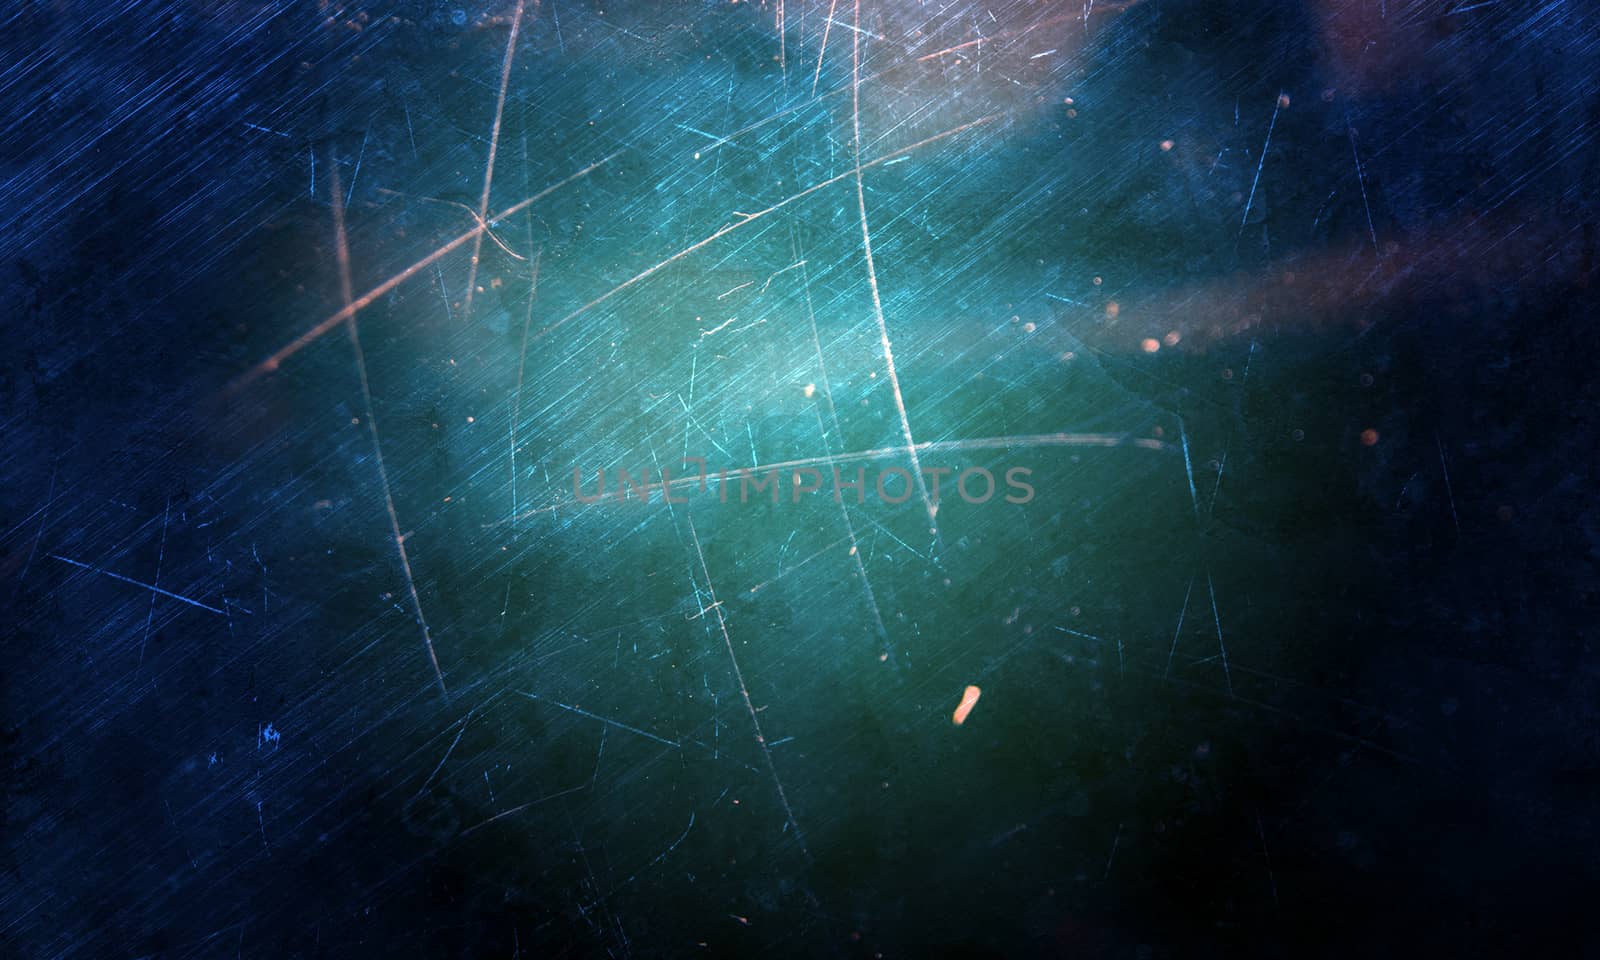 Abstract blue background with scratches and light